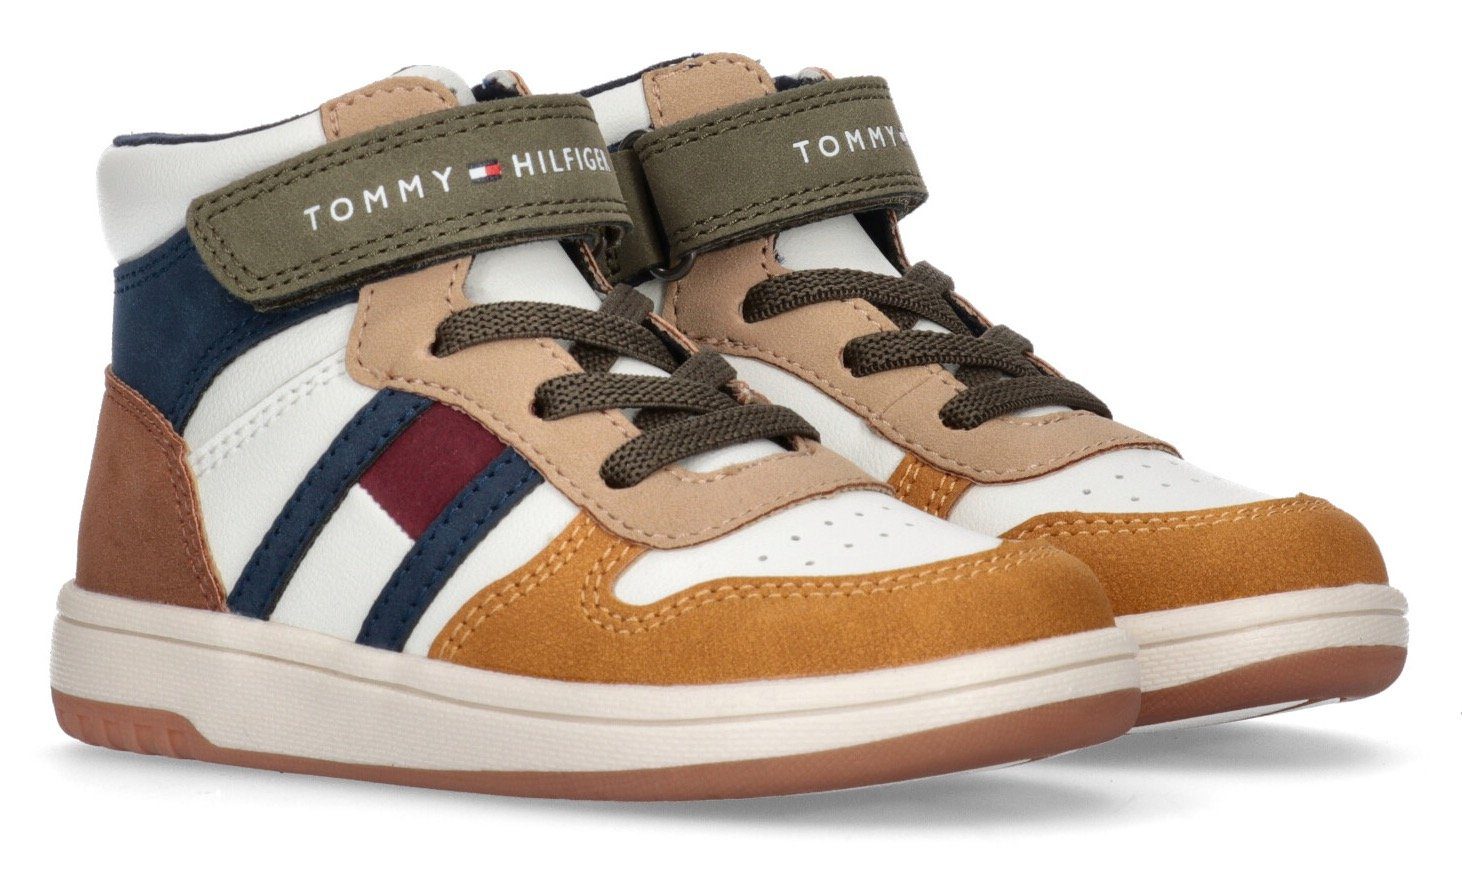 LACE-UP/VELCRO Hilfiger SNEAKER Tommy Look TOP modischen FLAG HIGH colorblocking Sneaker im